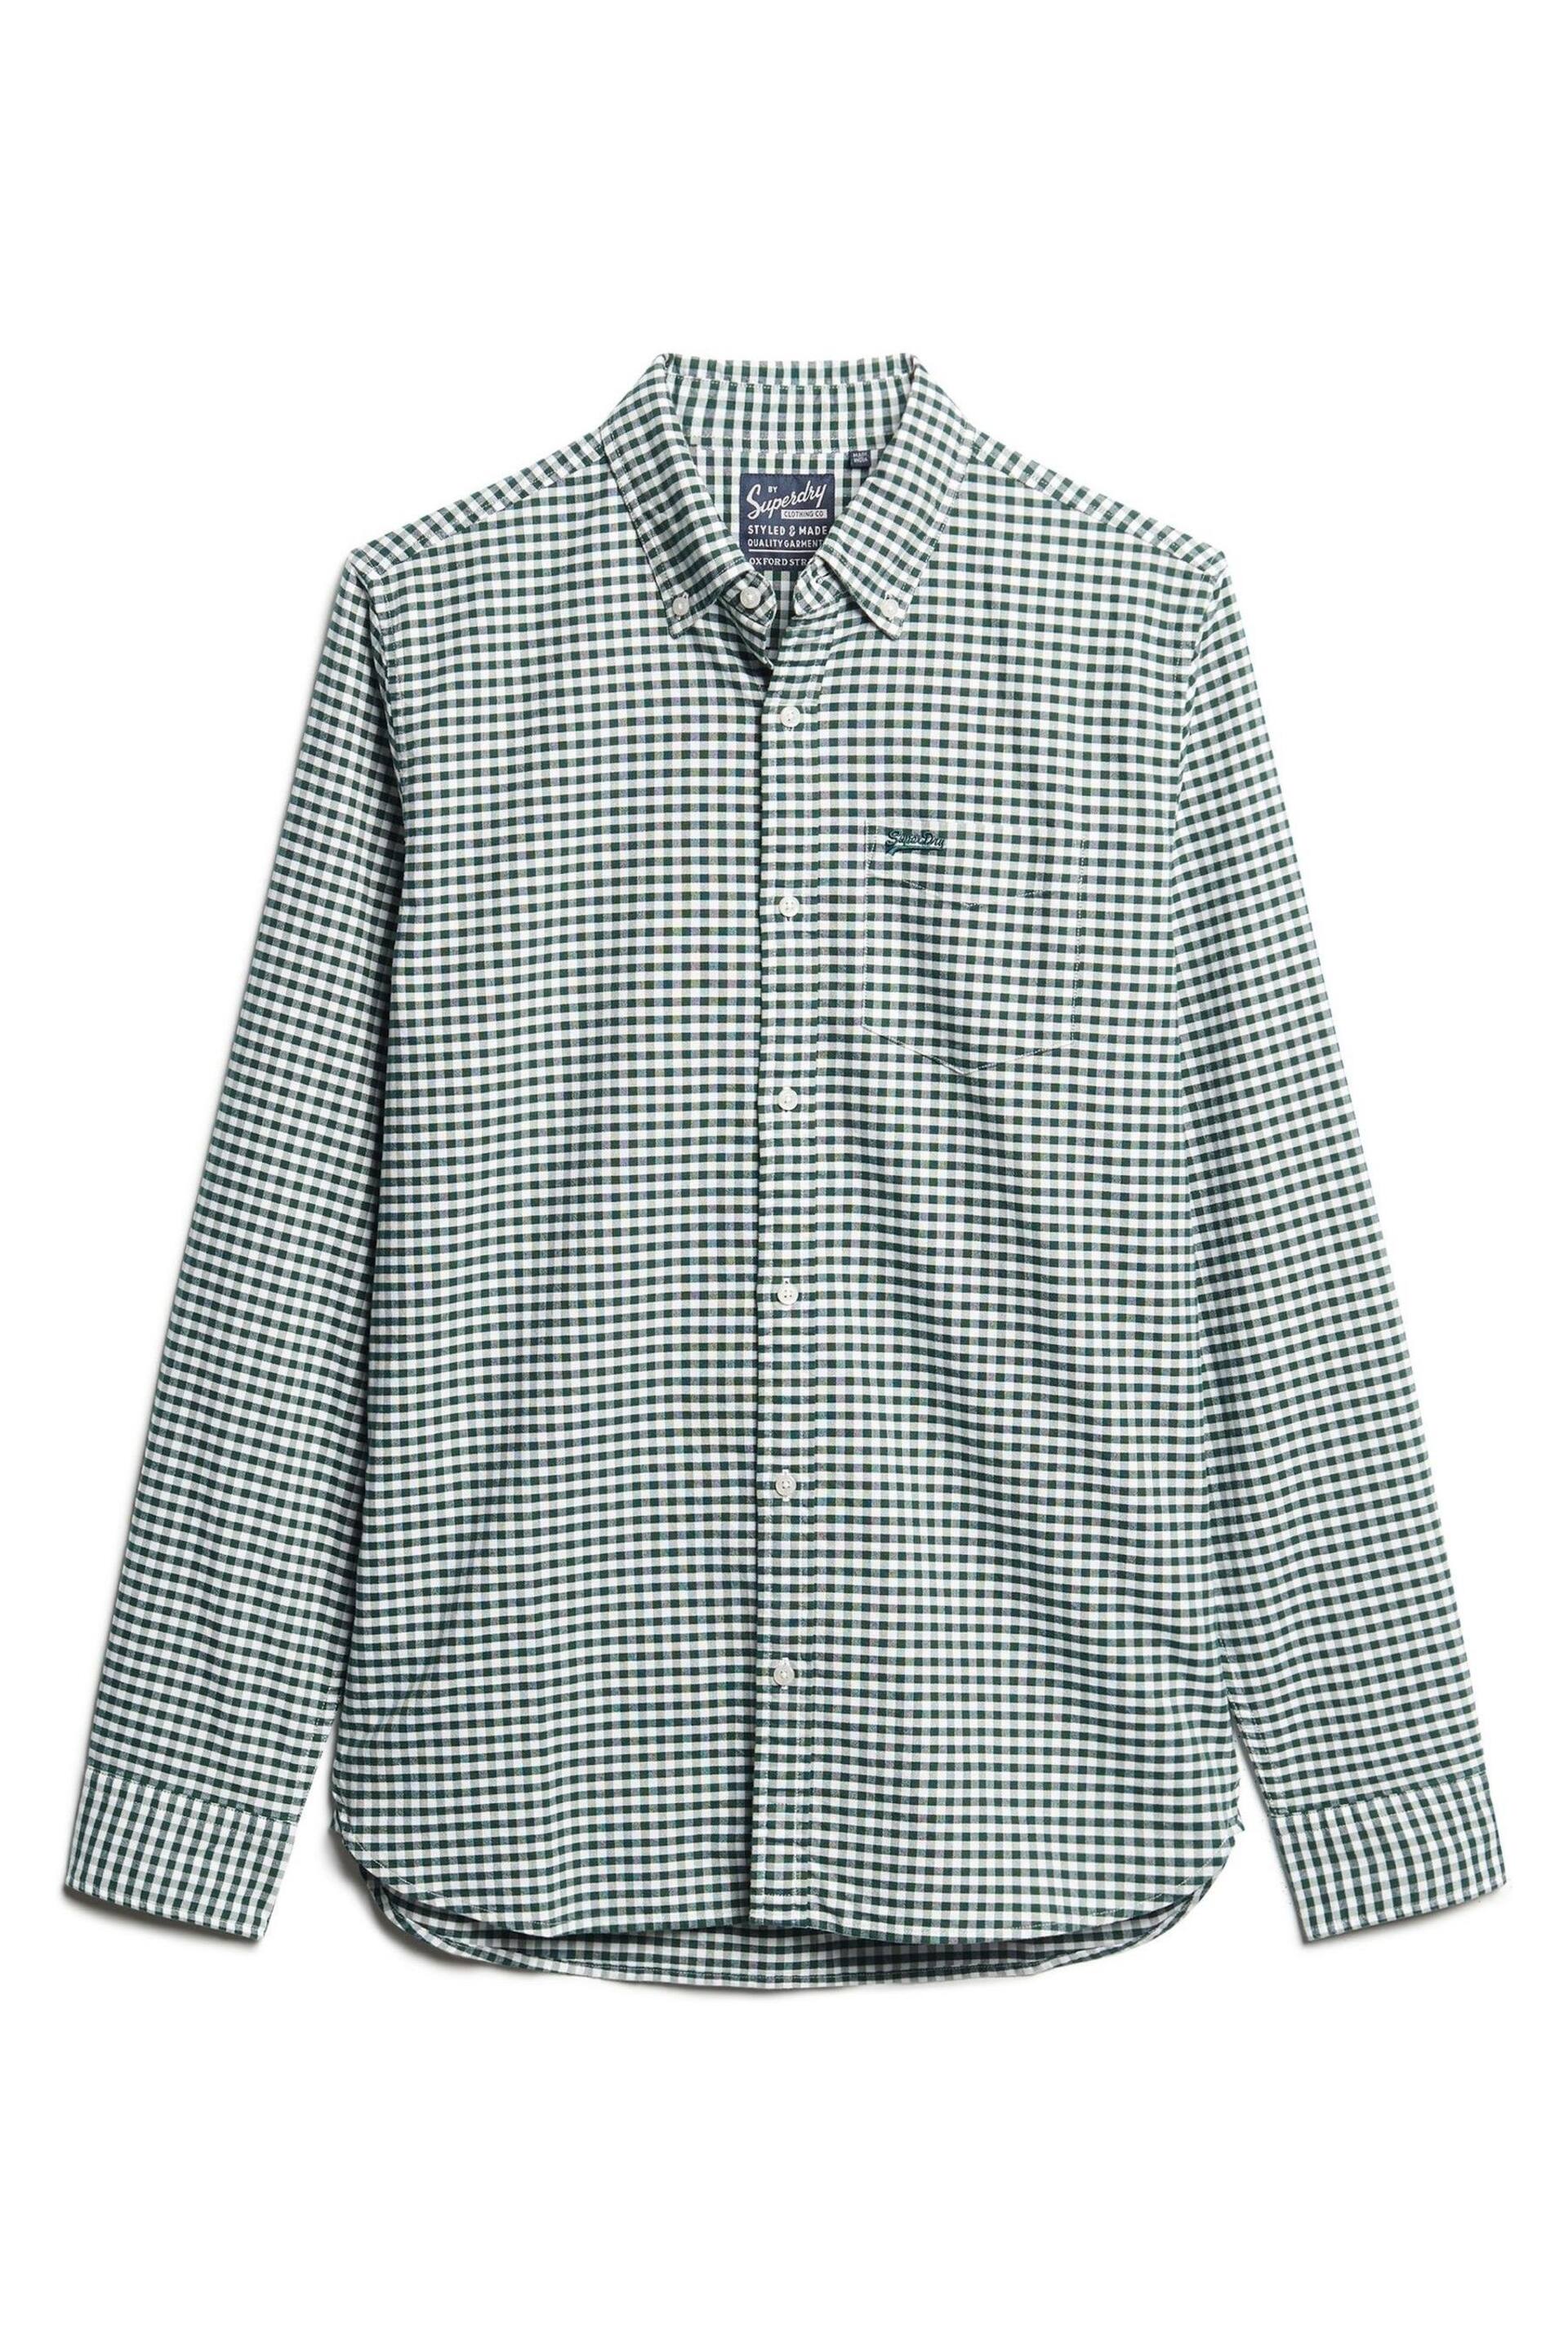 Superdry Green Cotton Long Sleeved Oxford Shirt - Image 4 of 6